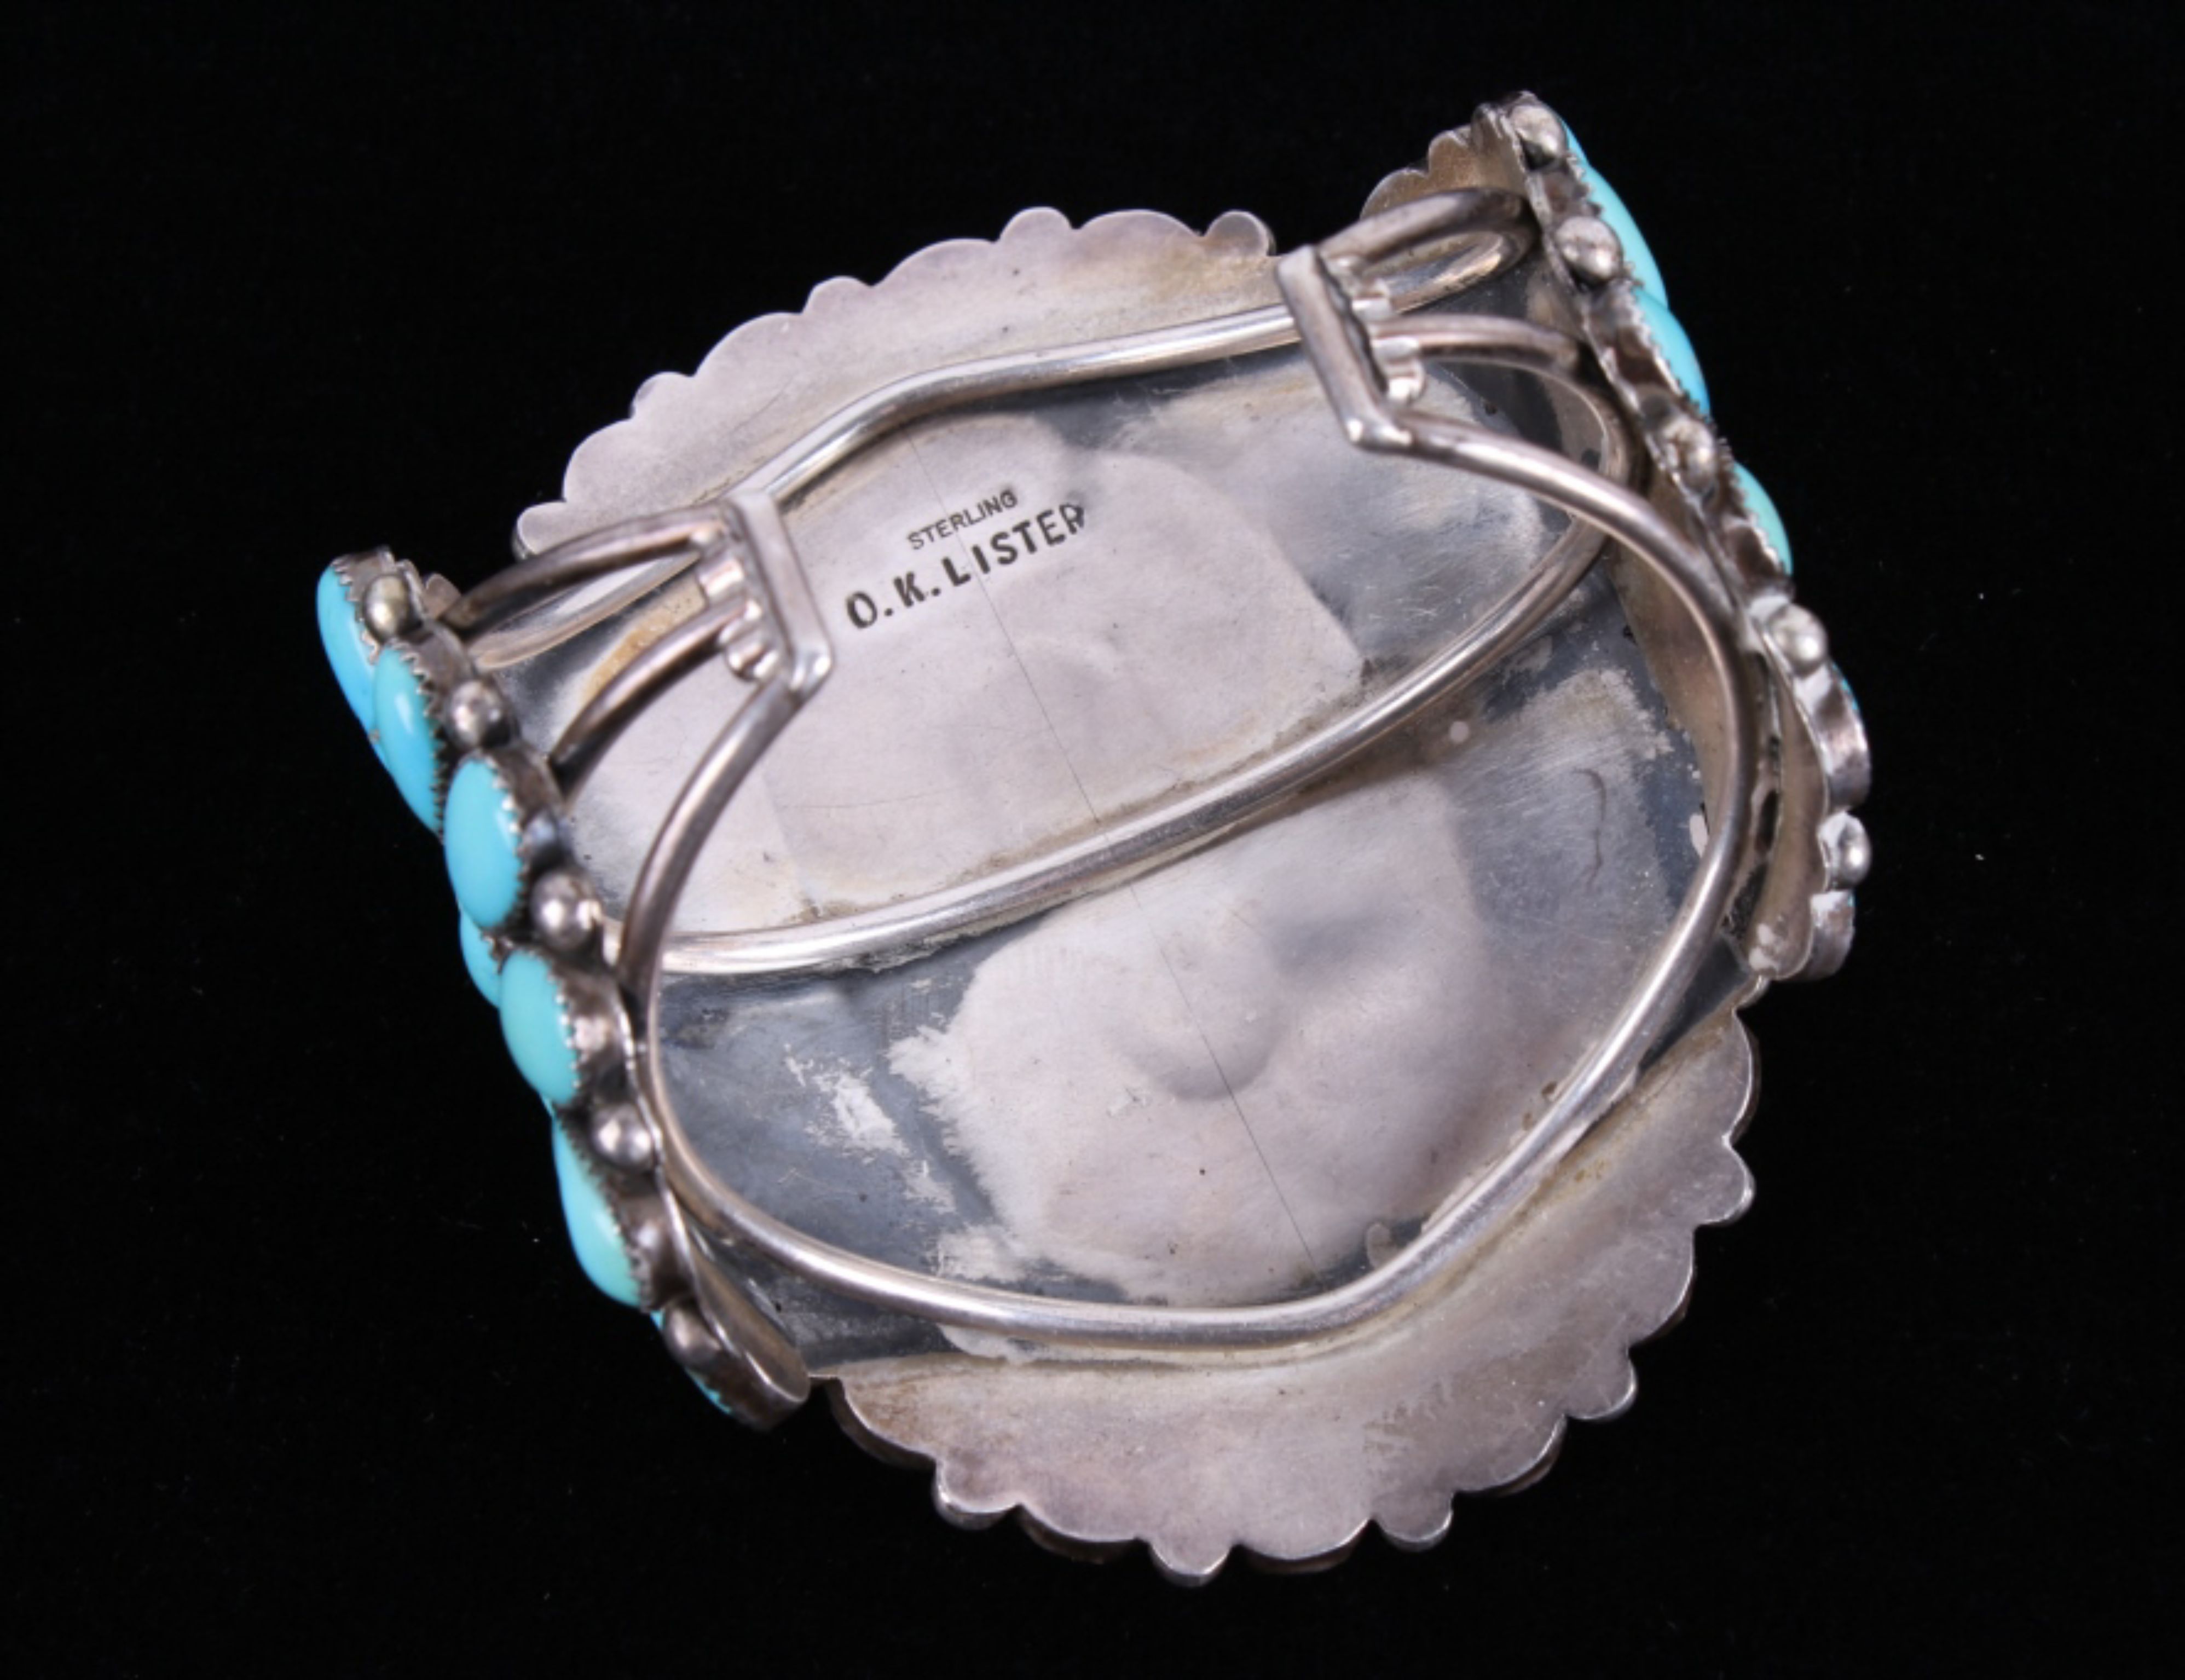 Navajo D.K. Lister Morenci Turquoise Sterling Cuff - Image 9 of 9